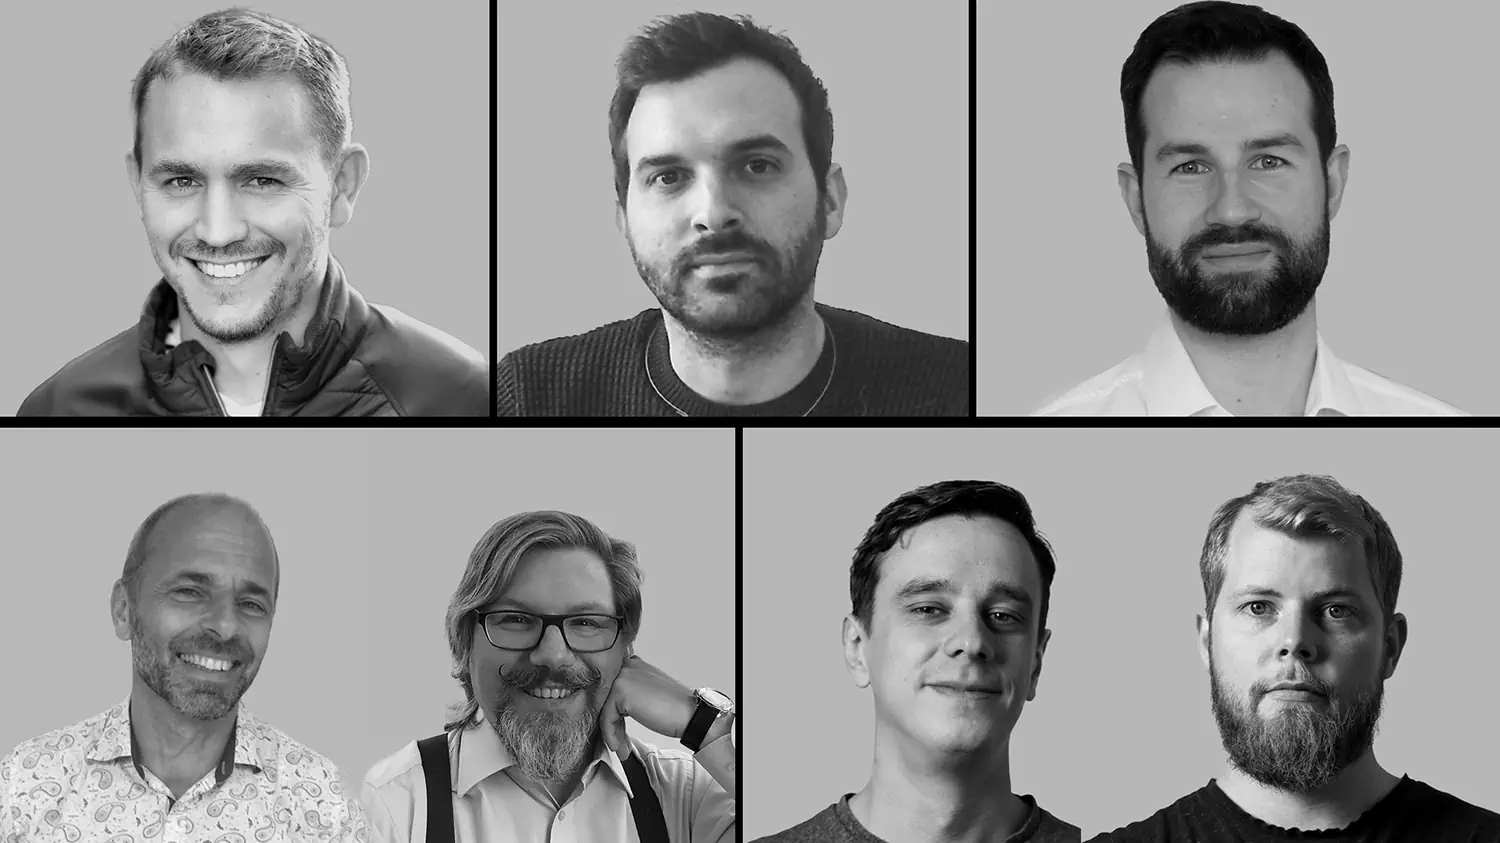 Five finalists and final jury announced for the Louis Vuitton Watch Prize